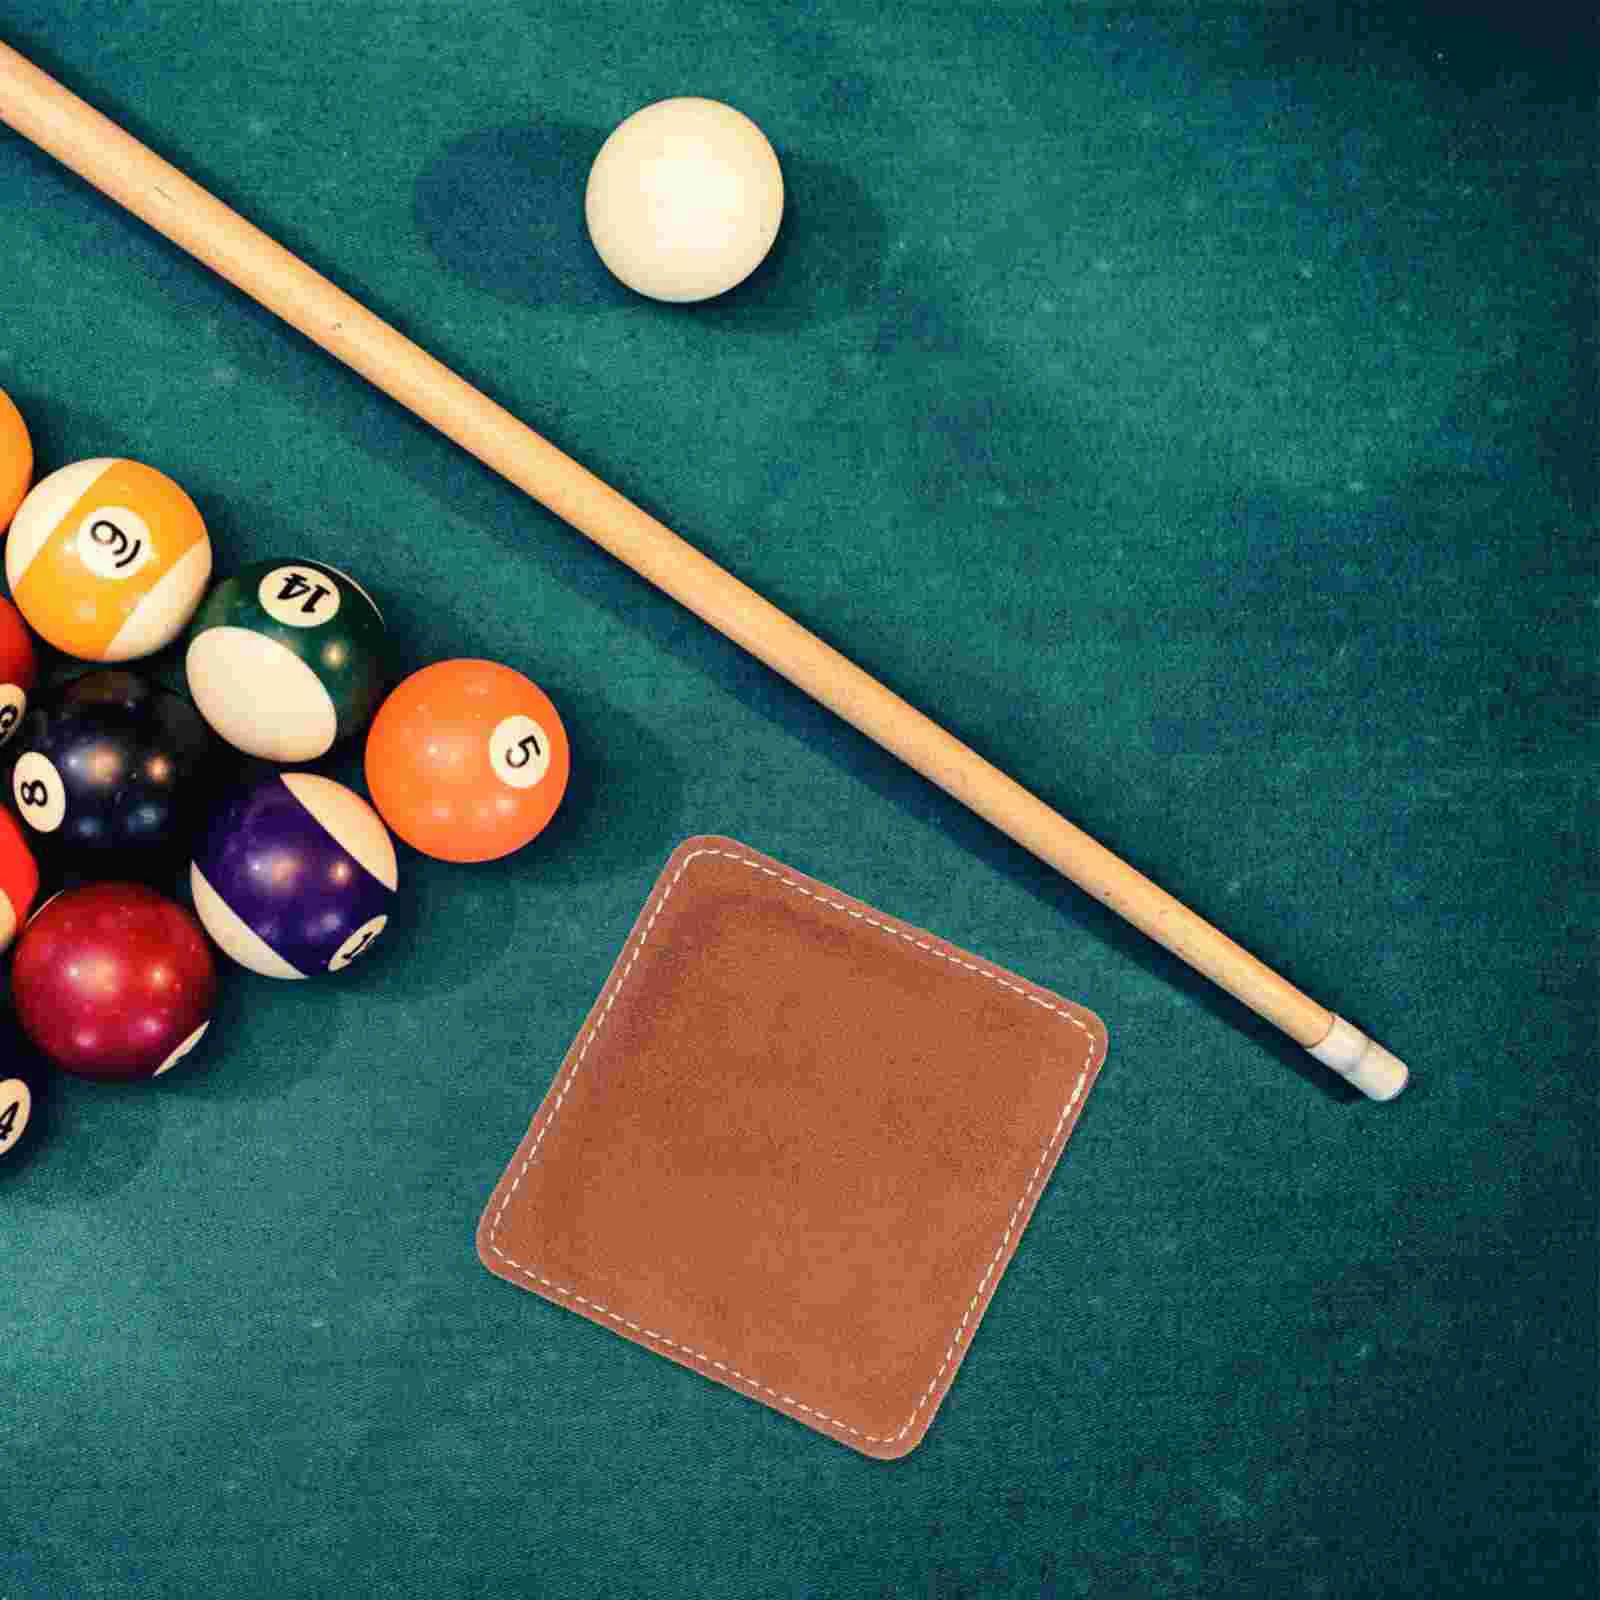 Wipe The Soft Club Rough on Surface (brown) Built God Tough Pool Stick Accessories Cue Shaft Polisher (rough Surface) wipe the soft club rough on surface brown snooker stick towel towels pool cue accessories rough surface cleaning